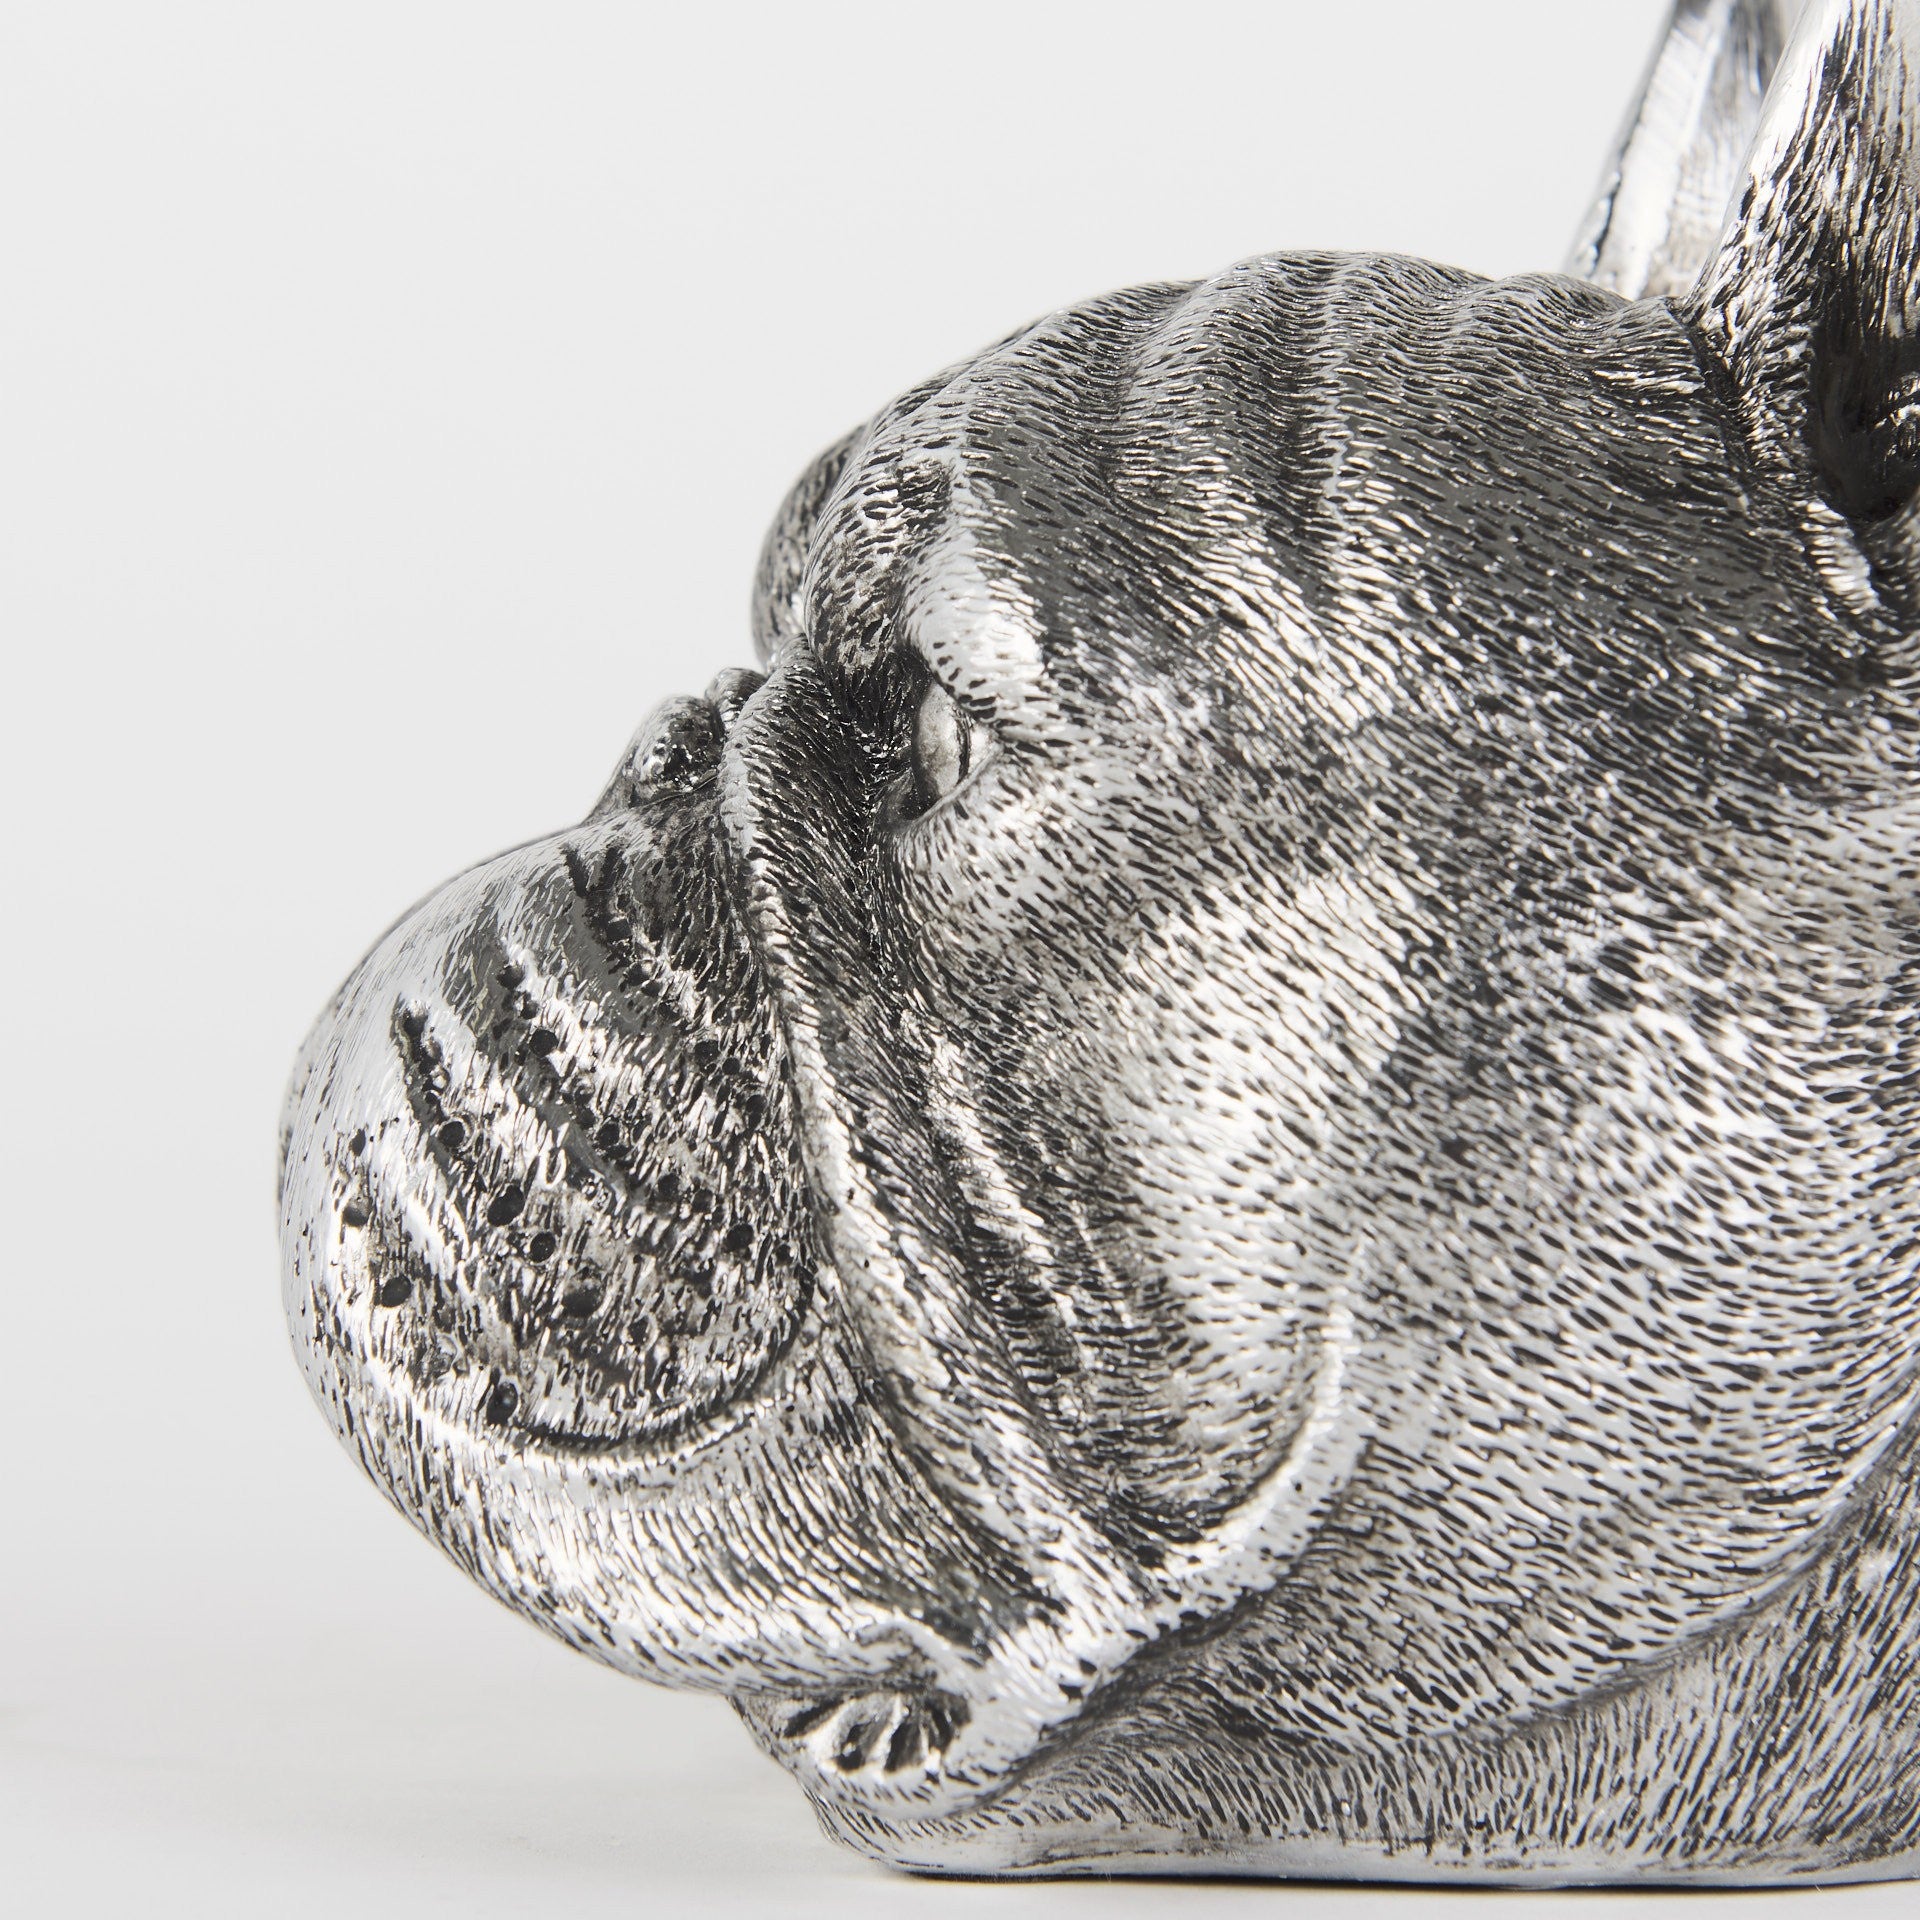 Antiqued Silver Pug Shaped Bookends